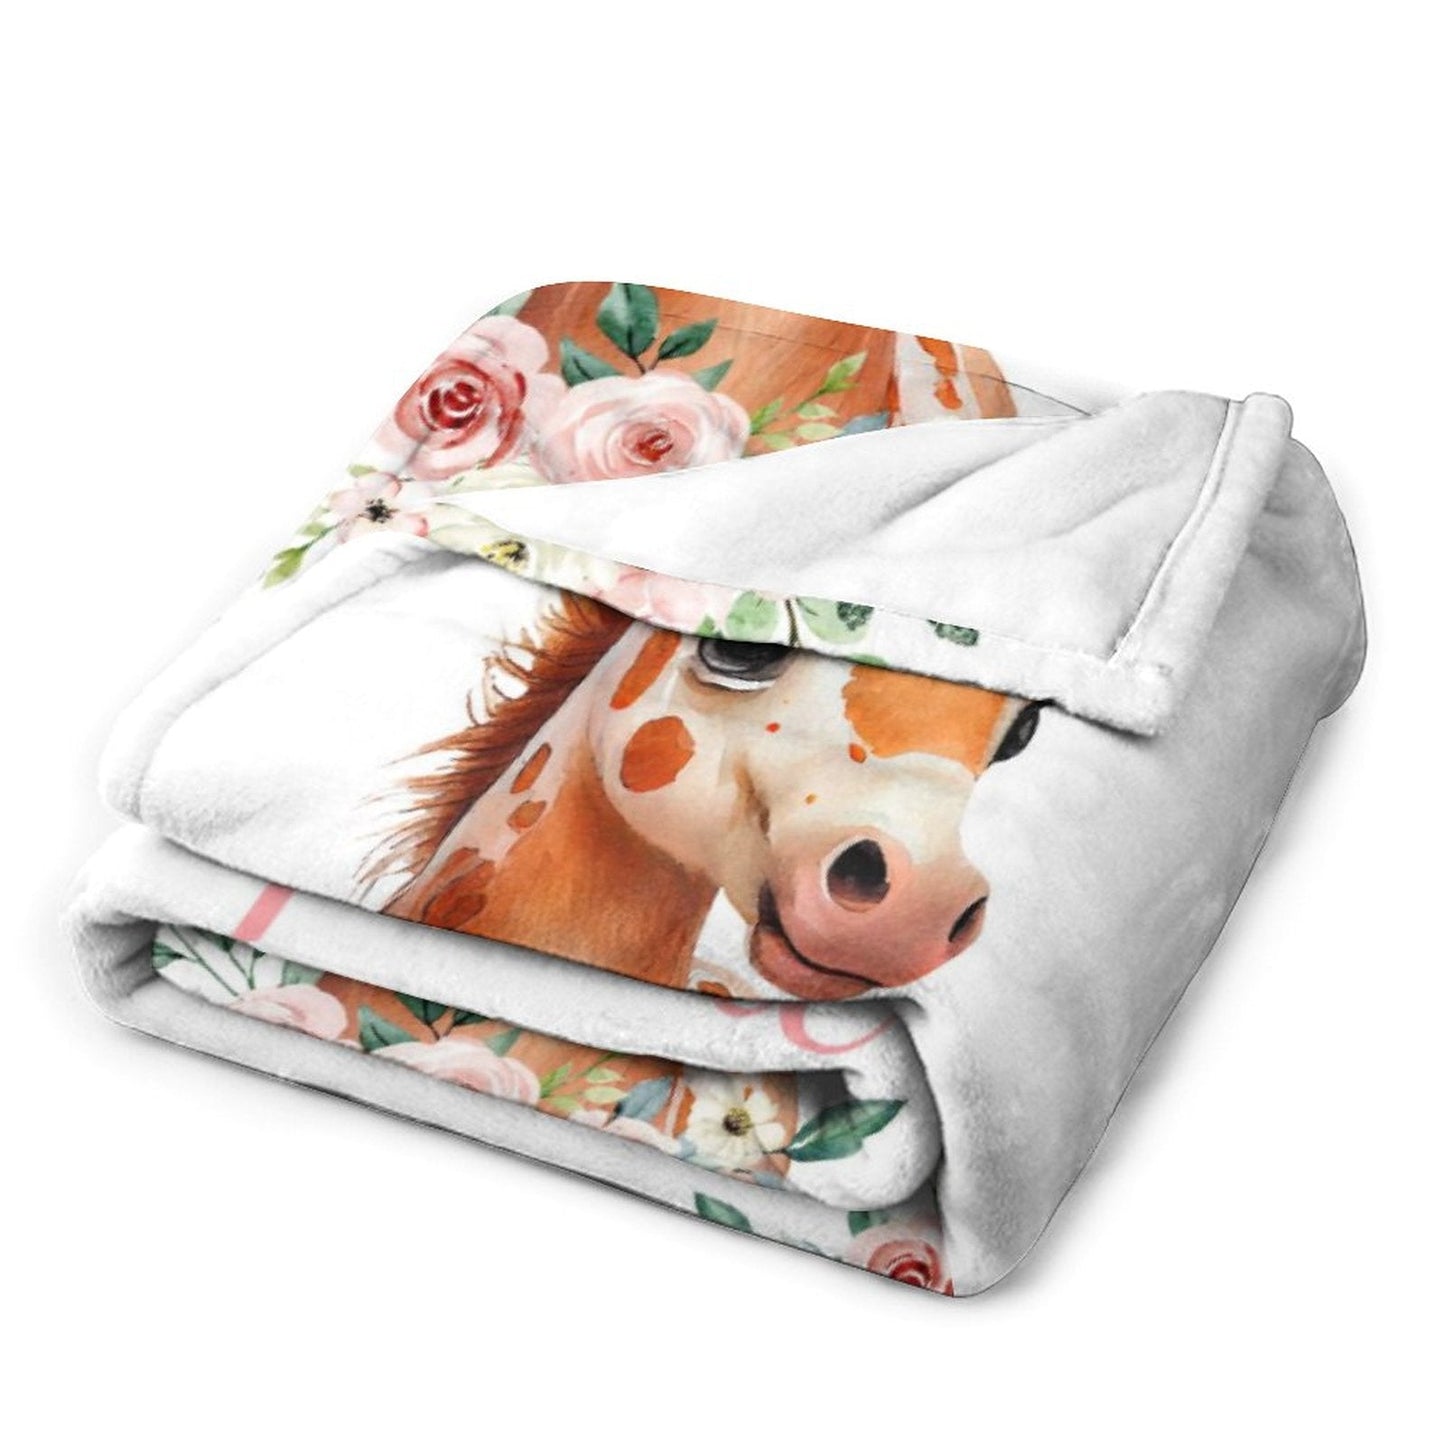 ️Horse Farm Animal Personalized Name Baby Blanket